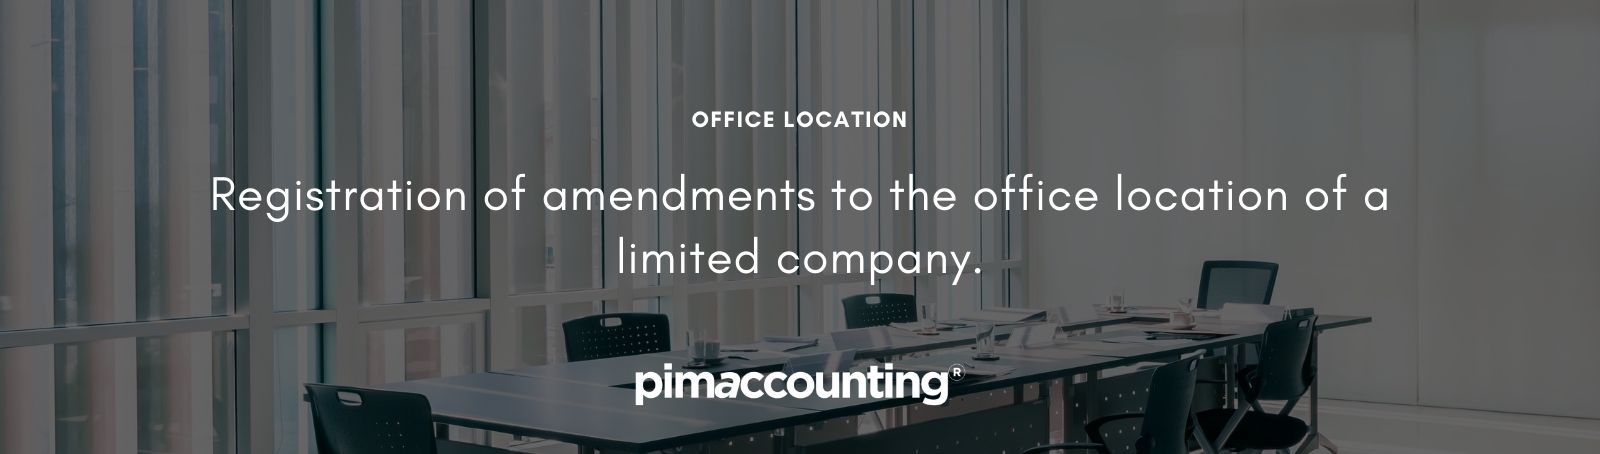  Registration of amendments to the office location of a limited company